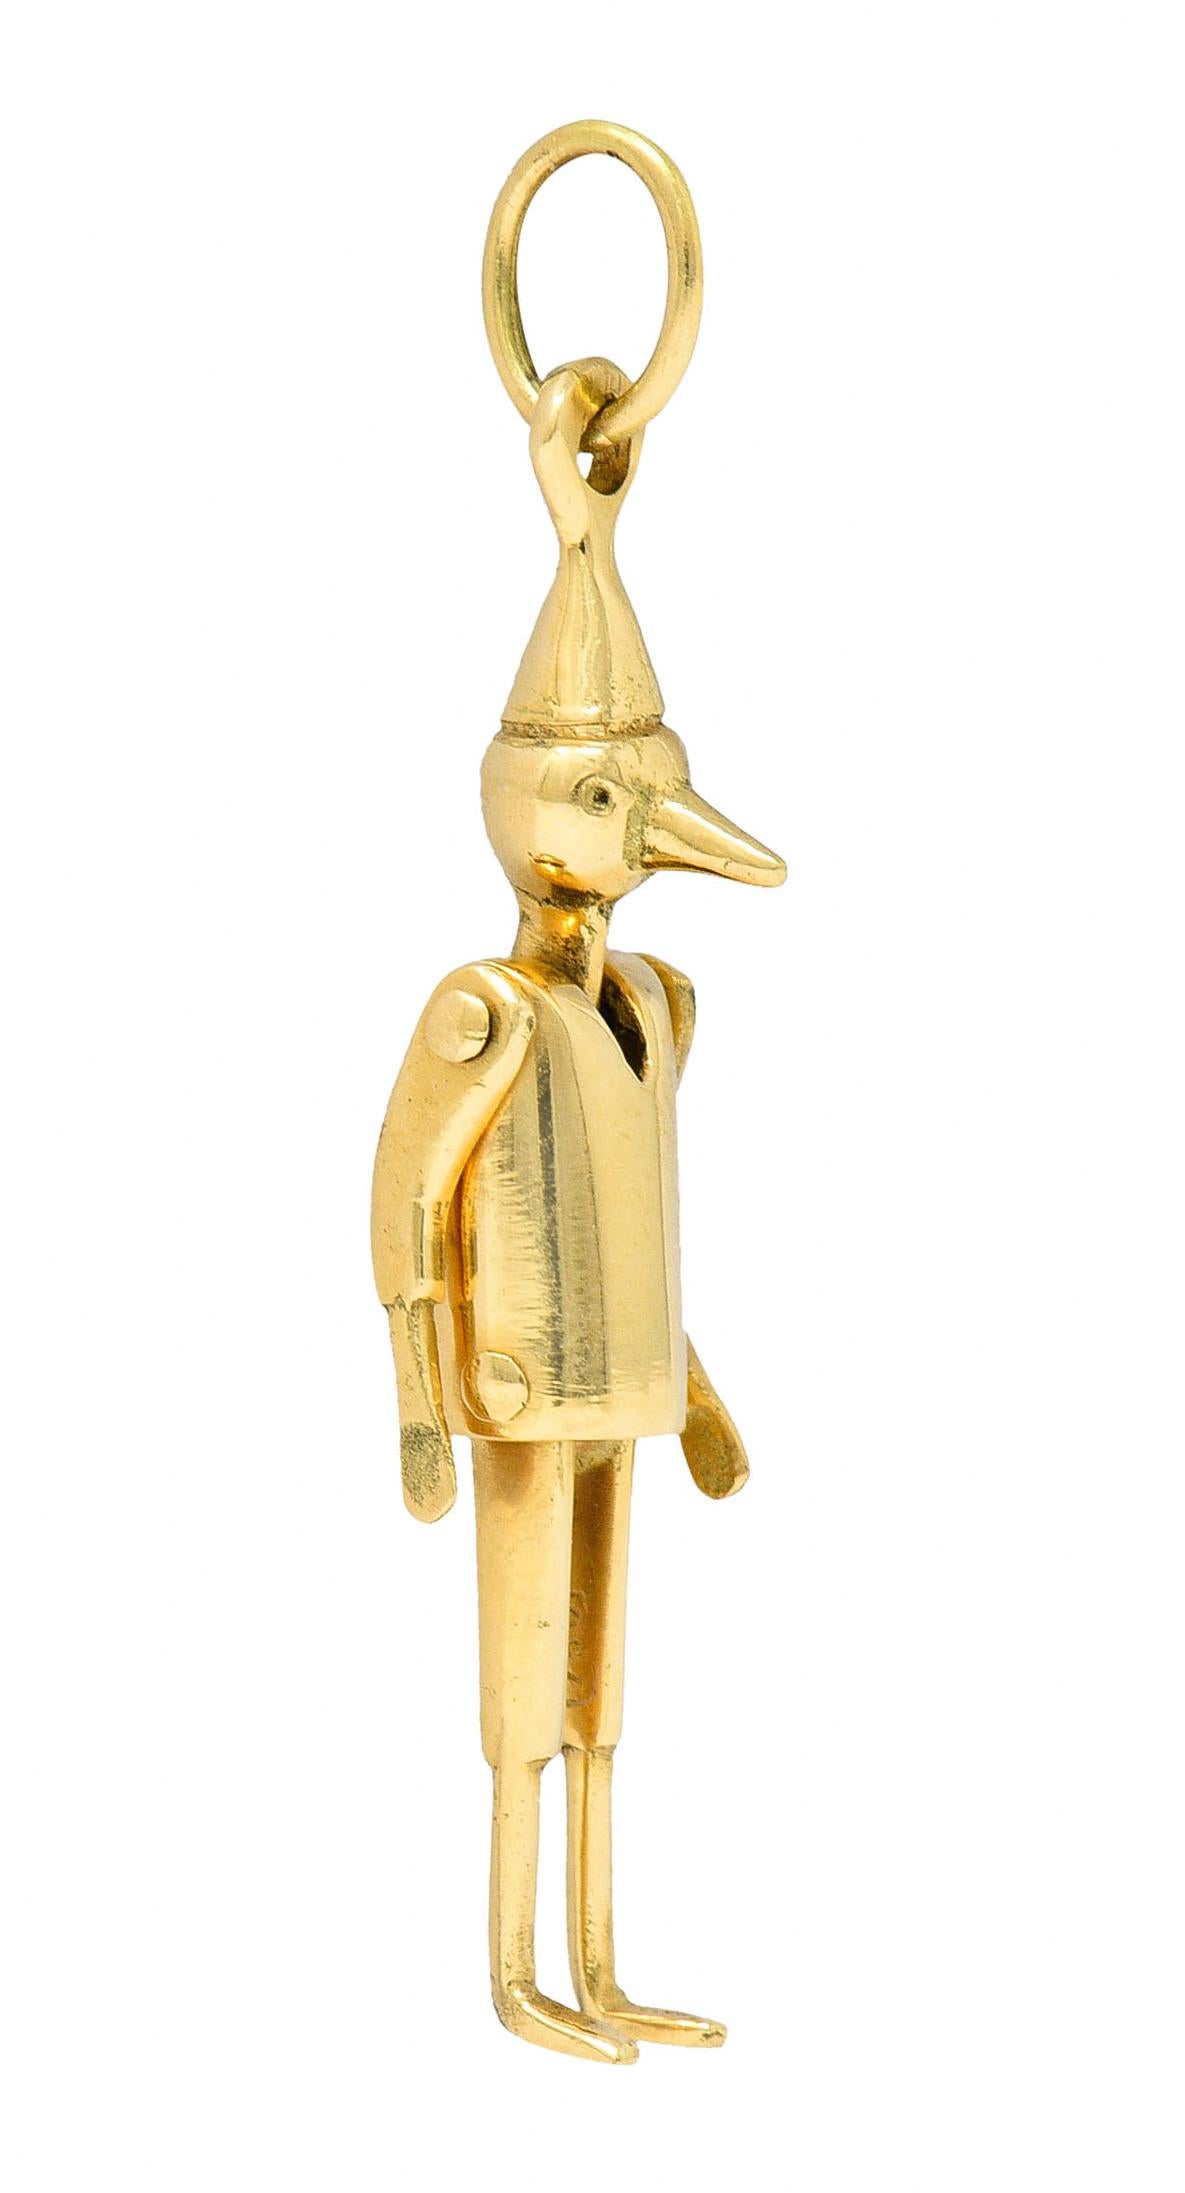 Charm is designed as Pinocchio with a polished gold finish

With articulated arms and legs then topped by jump ring bale

Stamped 750 for 18 karat gold

Circa: 1940s

Measures: 5/16 x 1 5/8 inches

Total weight: 4.3 grams

Whimsical. Joyful.